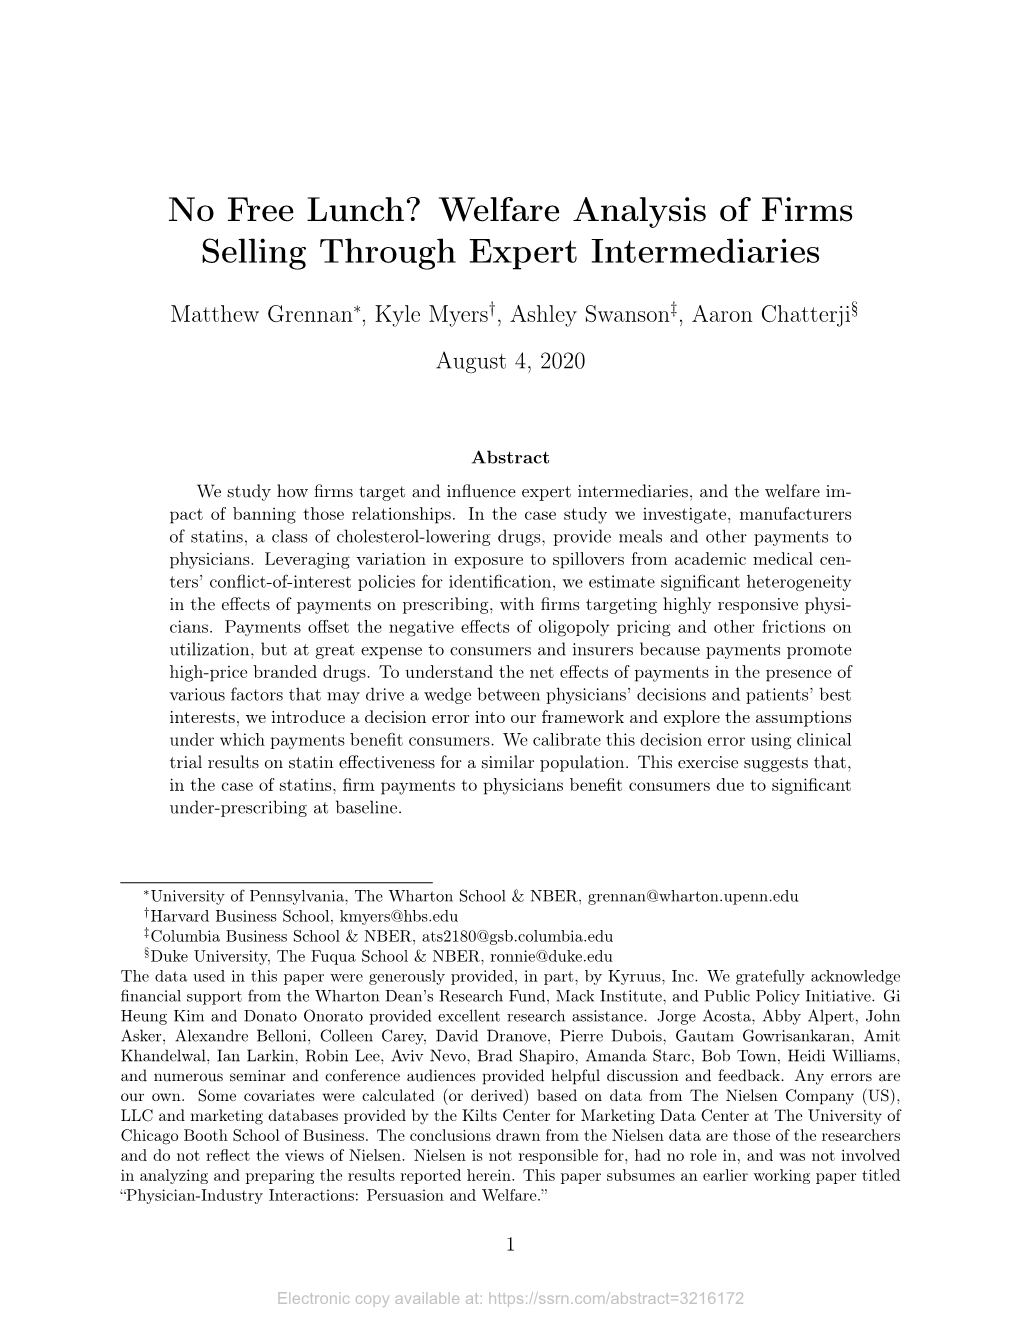 No Free Lunch? Welfare Analysis of Firms Selling Through Expert Intermediaries